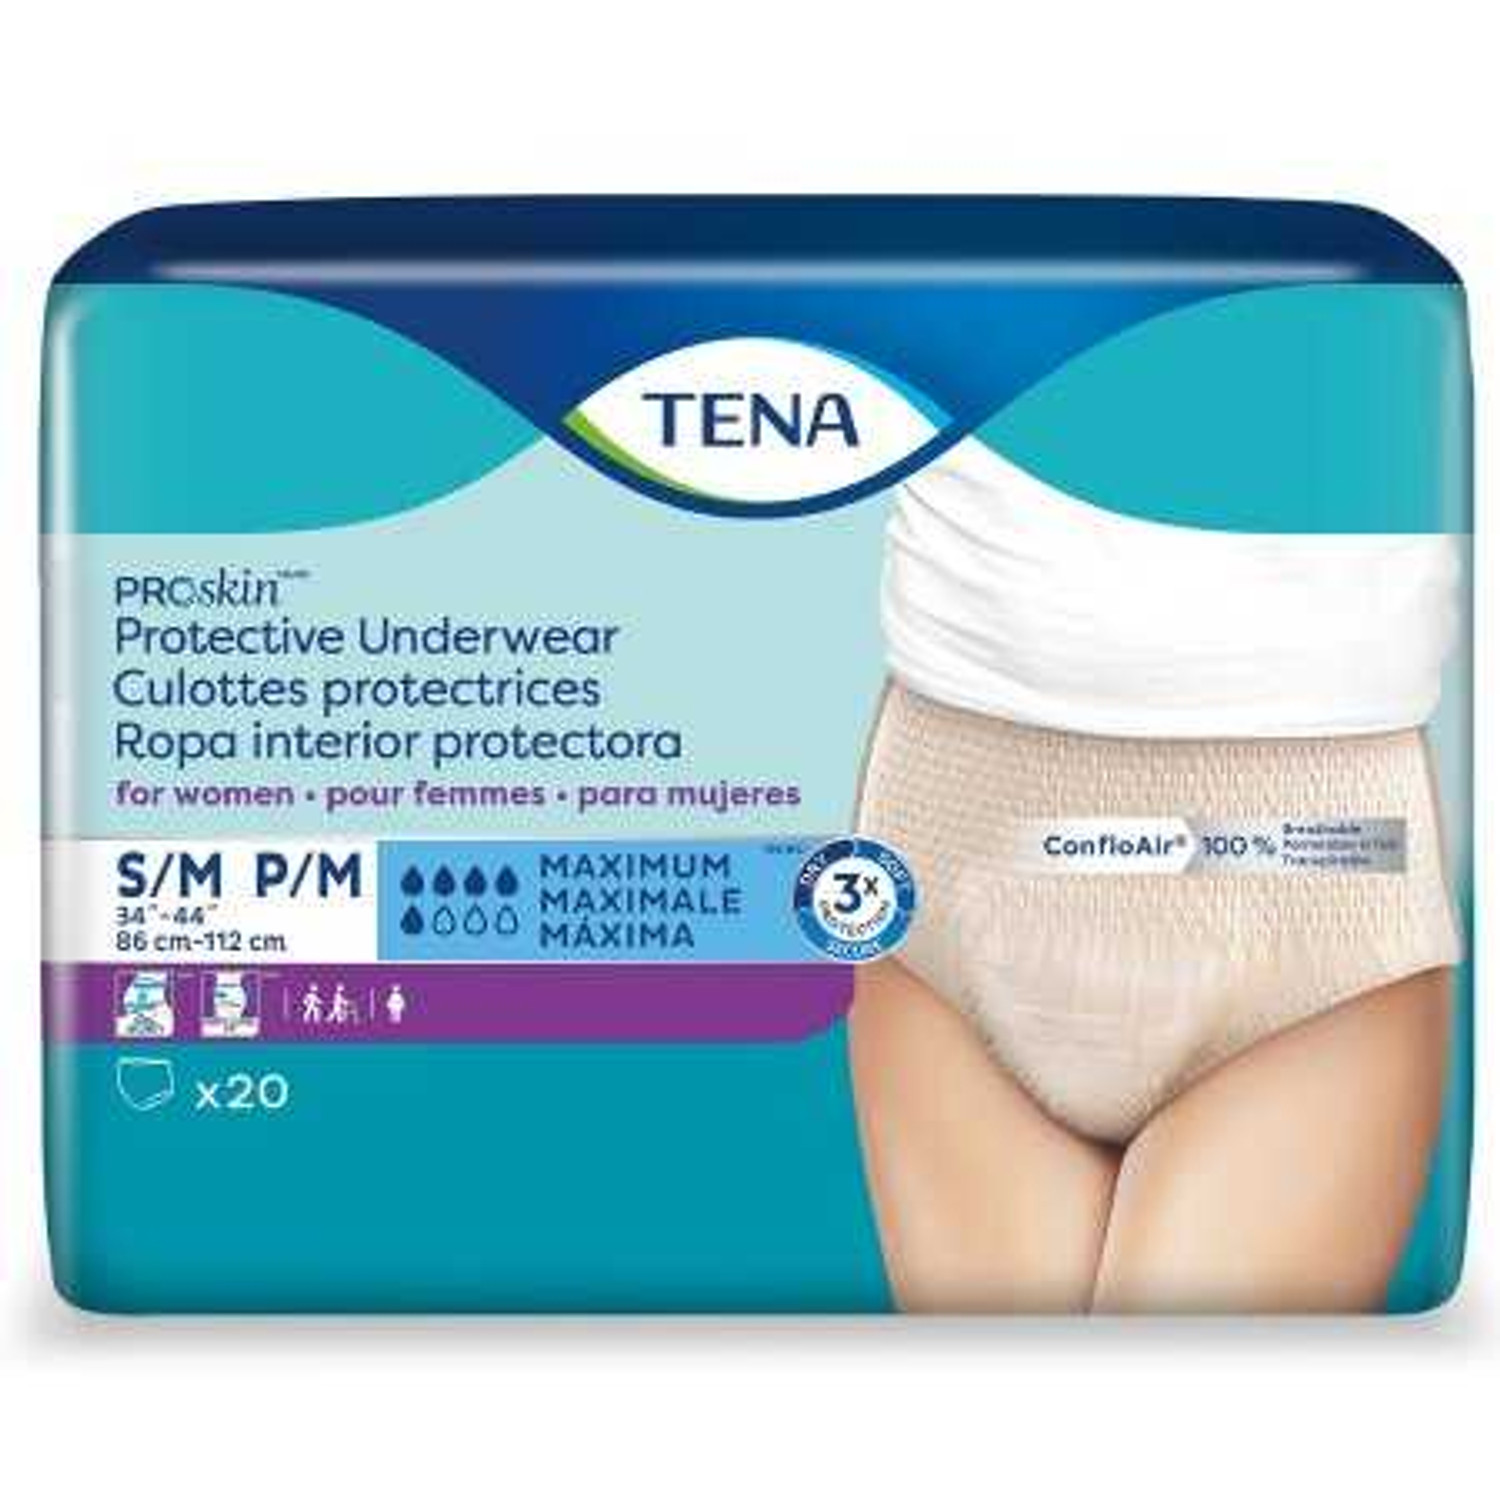 https://cdn11.bigcommerce.com/s-1l9d1d1d79/images/stencil/1500x1500/products/153374/305675/Female-Adult-Absorbent-Underwear-TENA-ProSkin-Protective-Pull-On-with-Tear-Away-Seams-Small-Medium-Disposable-Moderate-Absorbency-73020-Bag20-1026000-Essity-HMS_166570__02971.1682647531.jpg?c=2